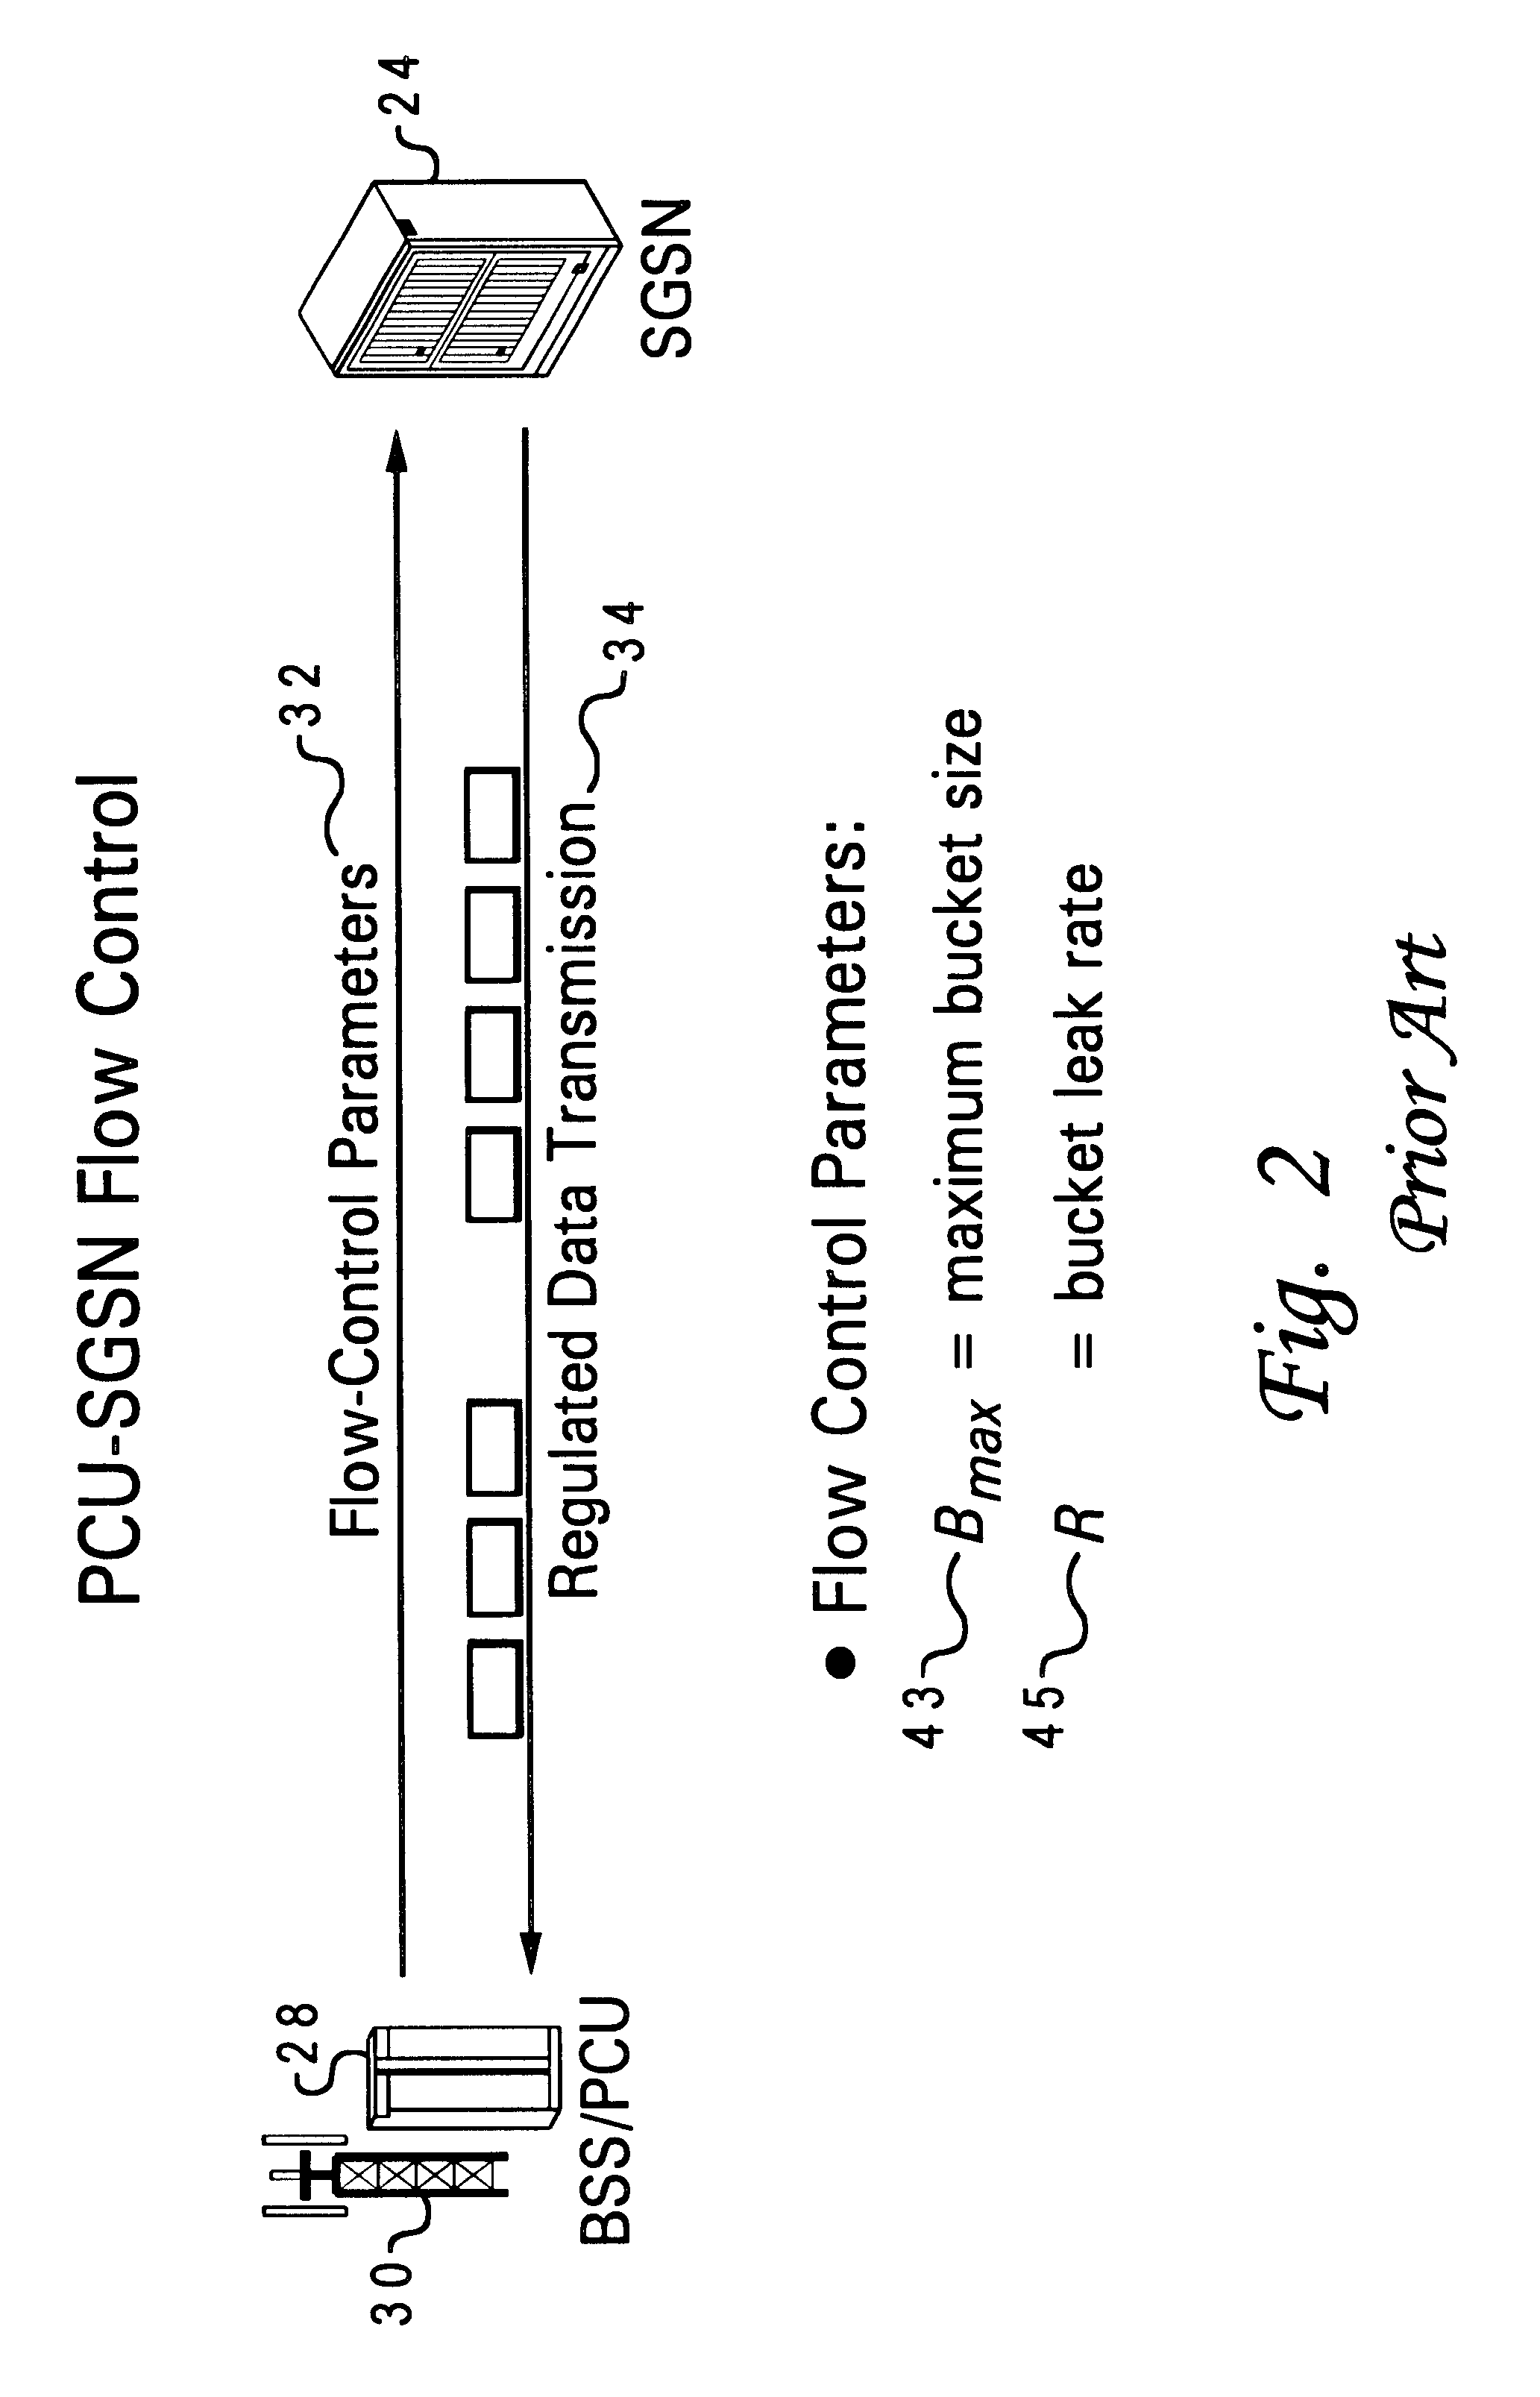 Distributed flow control system and method for GPRS networks based on leaky buckets